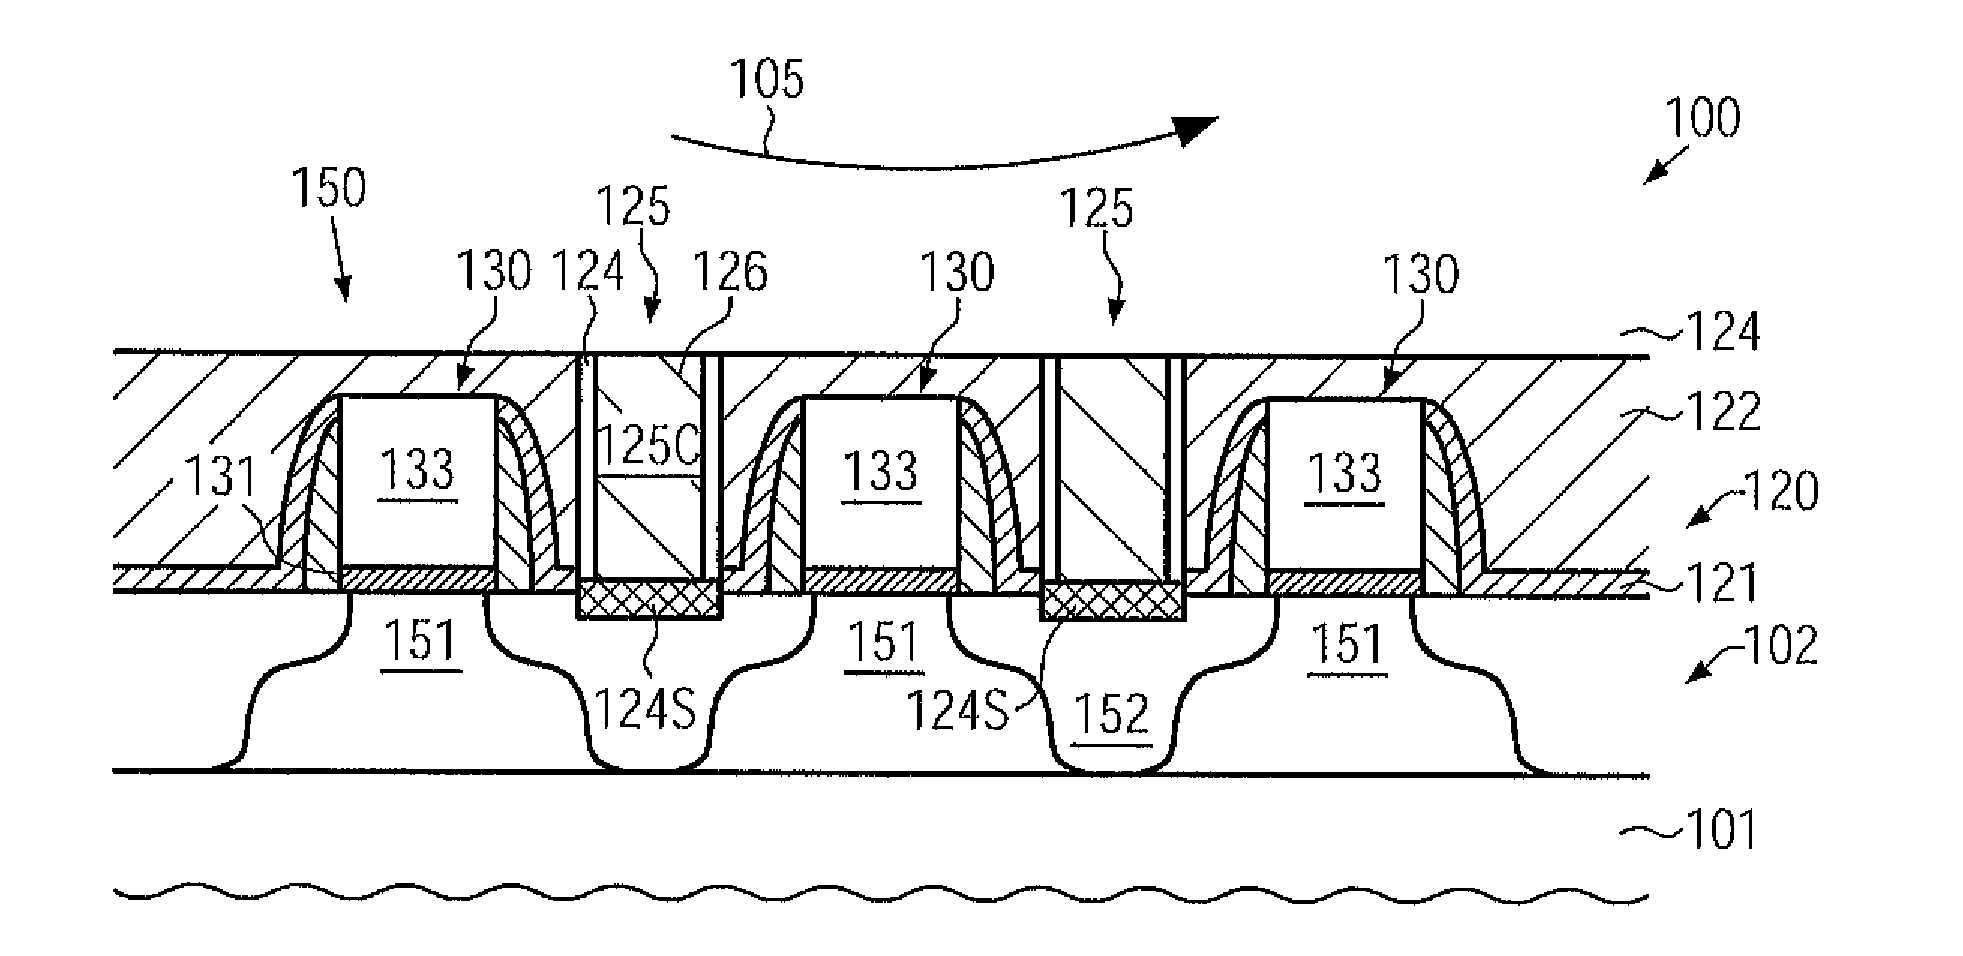 Semiconductor Device Comprising Contact Elements and Metal Silicide Regions Formed in a Common Process Sequence